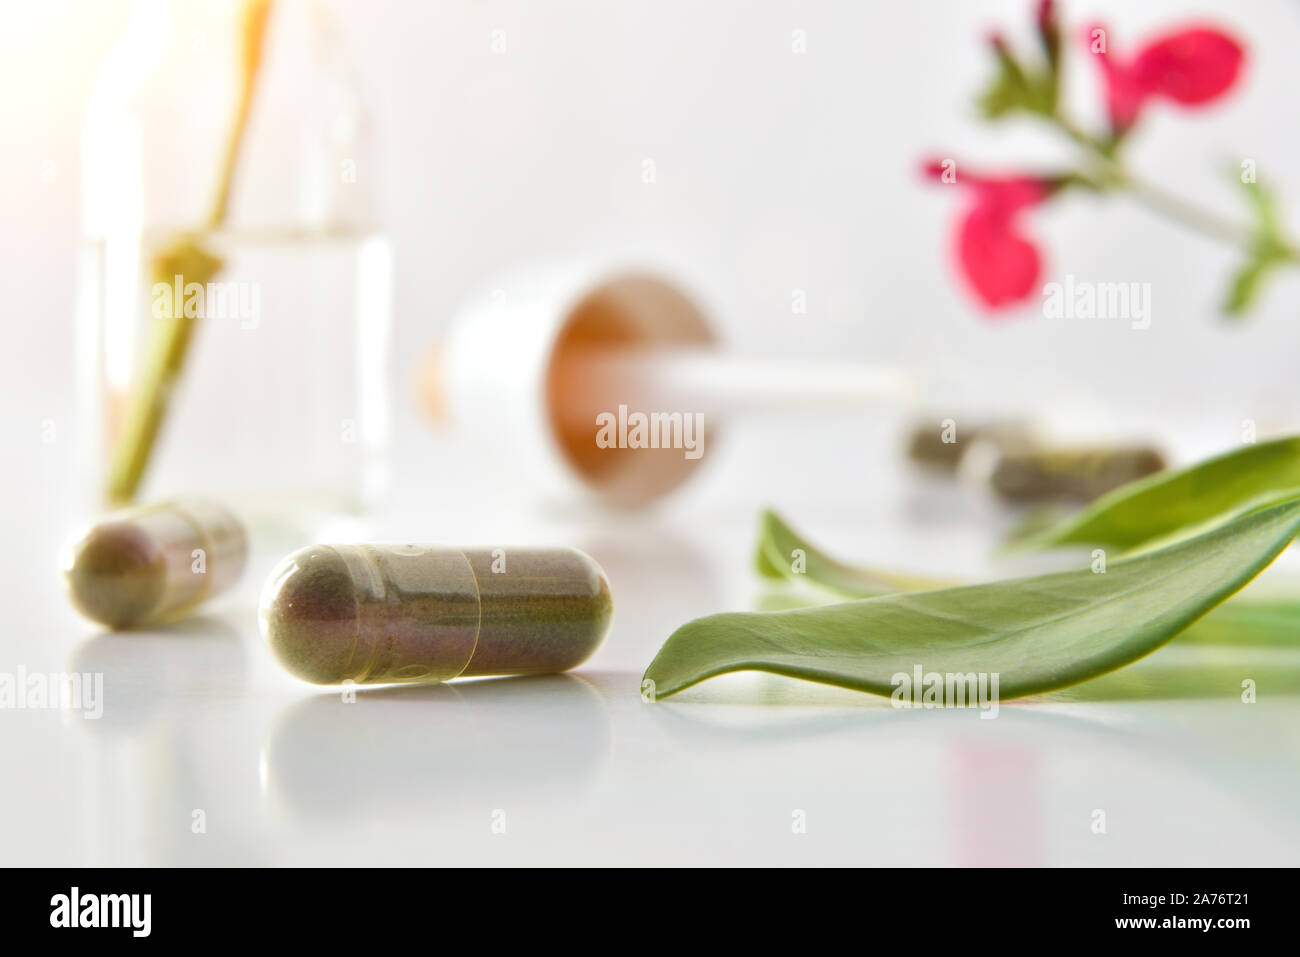 Natural medicine capsules with plants flowers and jar in background. Natural medicine concept. Front view. Horizontal composition. Stock Photo